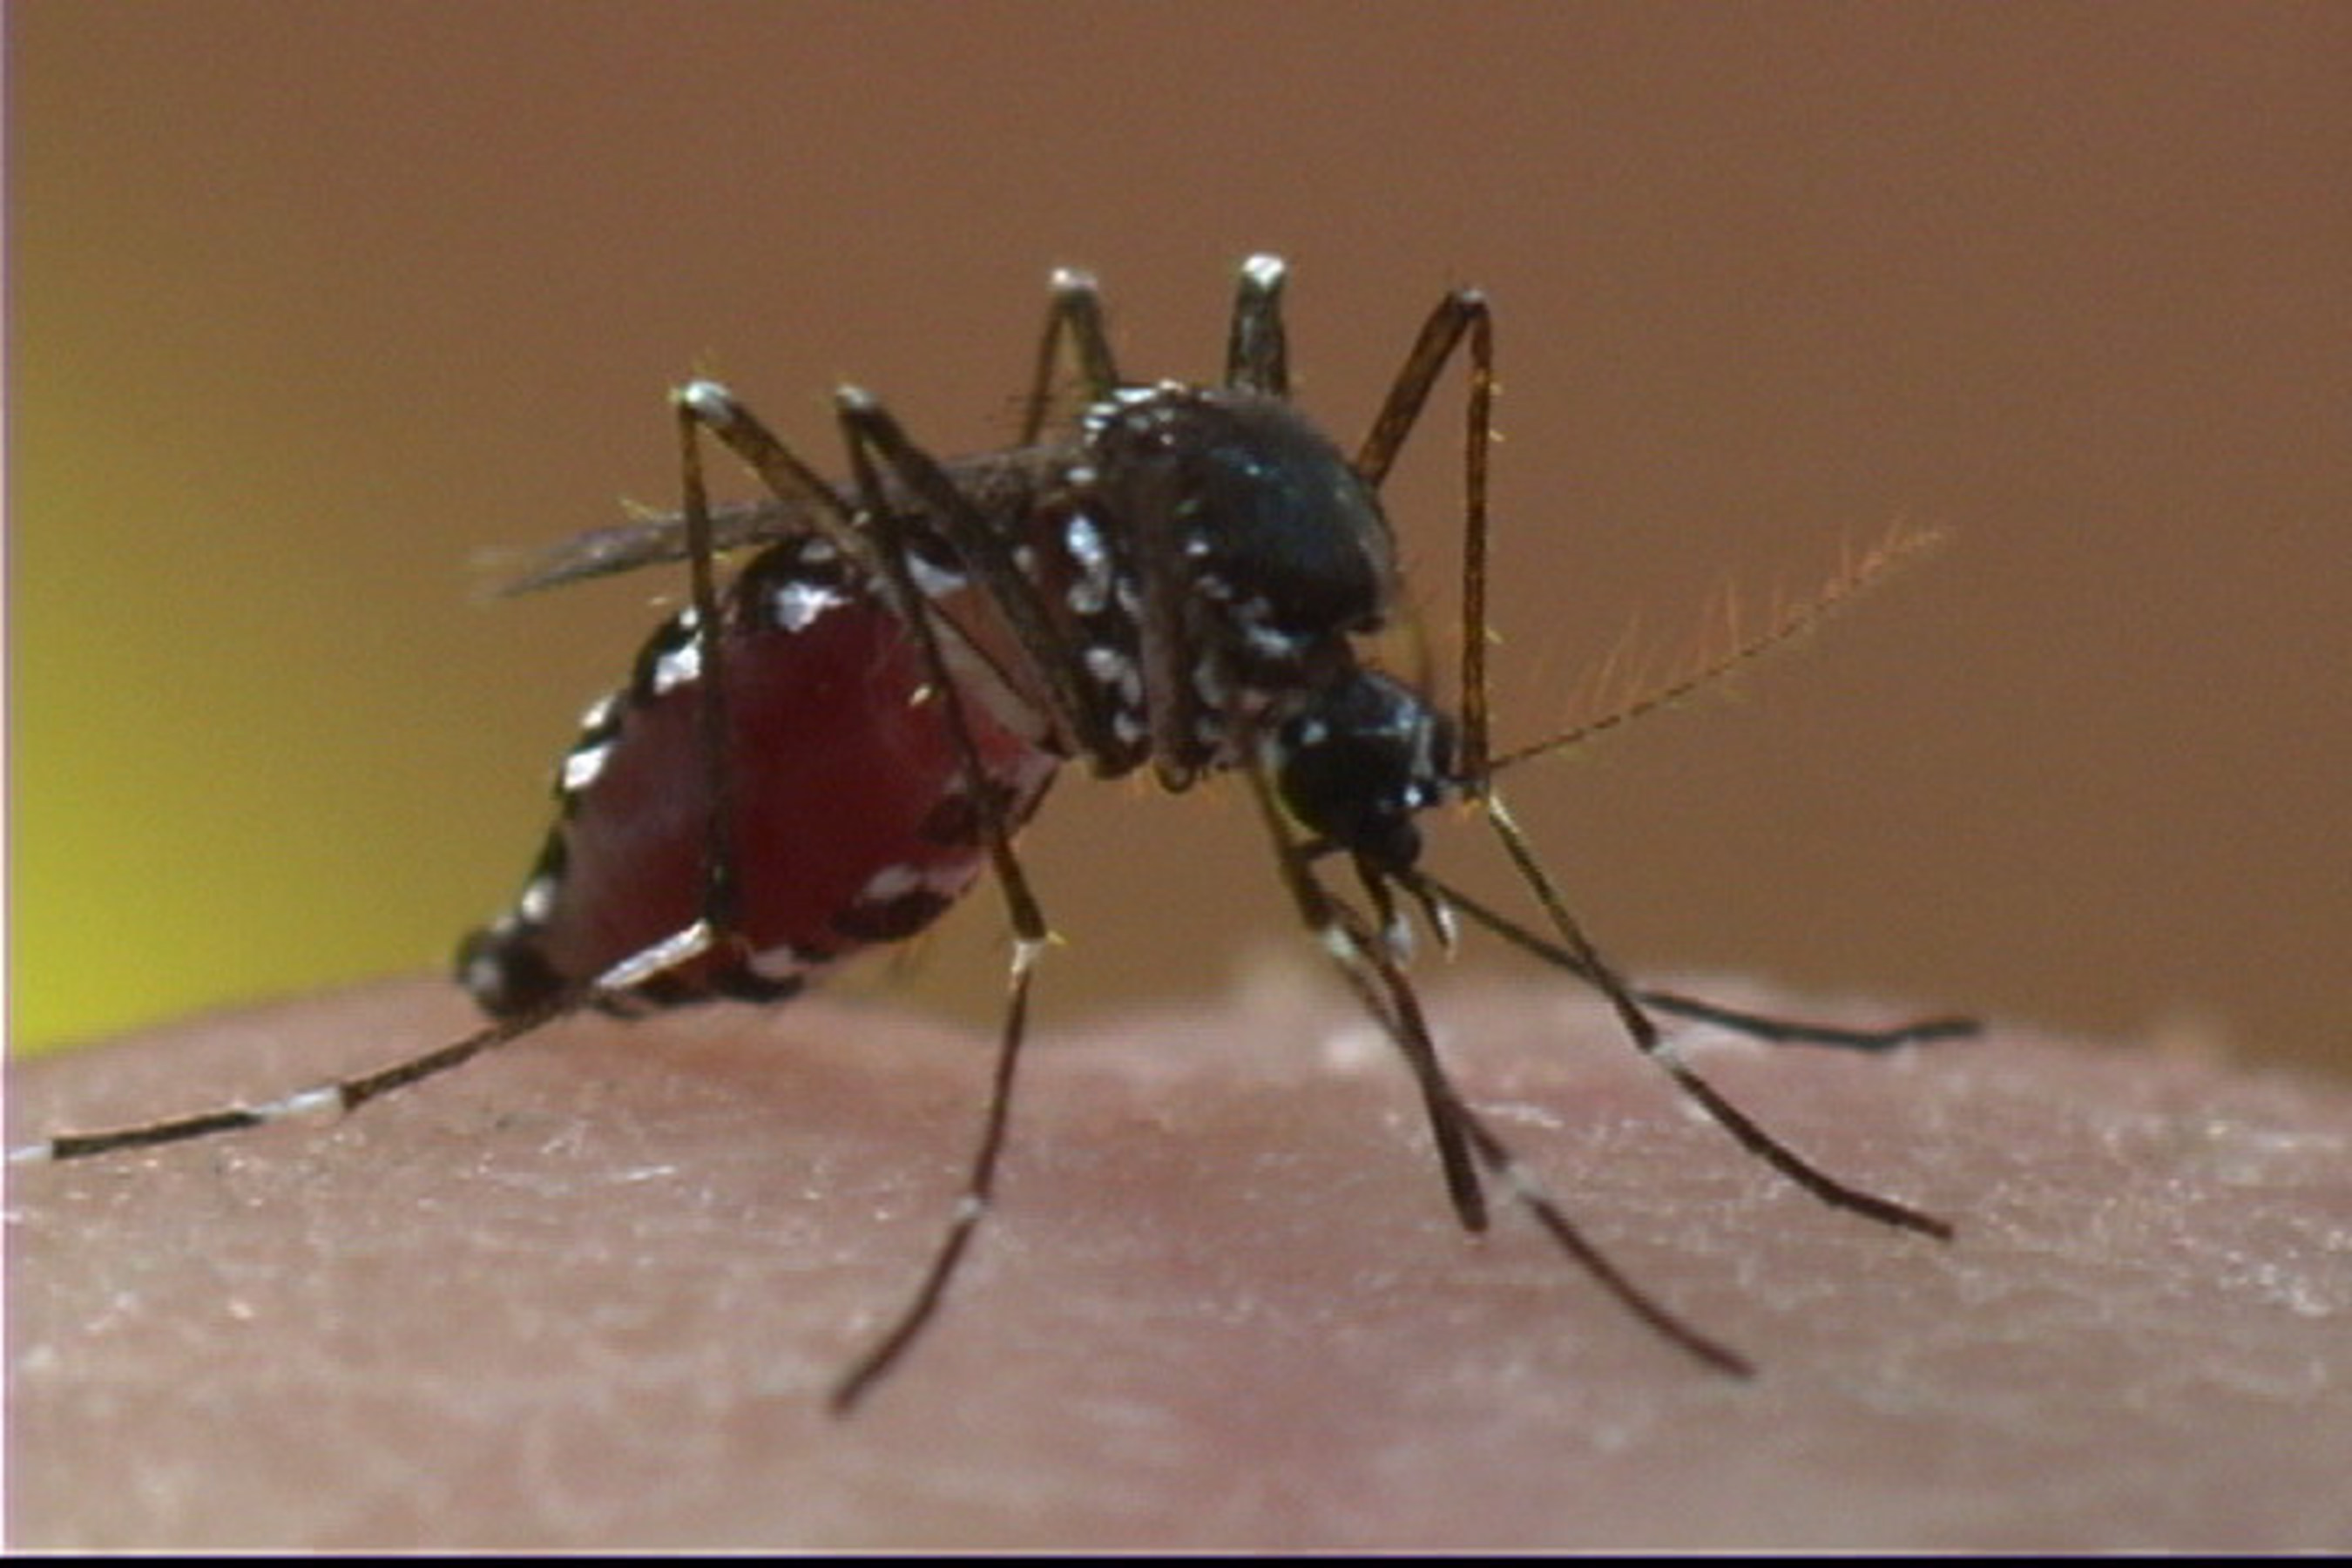 The Asian tiger mosquito can carry and spread Zika virus, Chikungunya virus and Dengue virus. They are most common in the southern United States and are aggressive daytime biters that also bite at dusk and dawn.